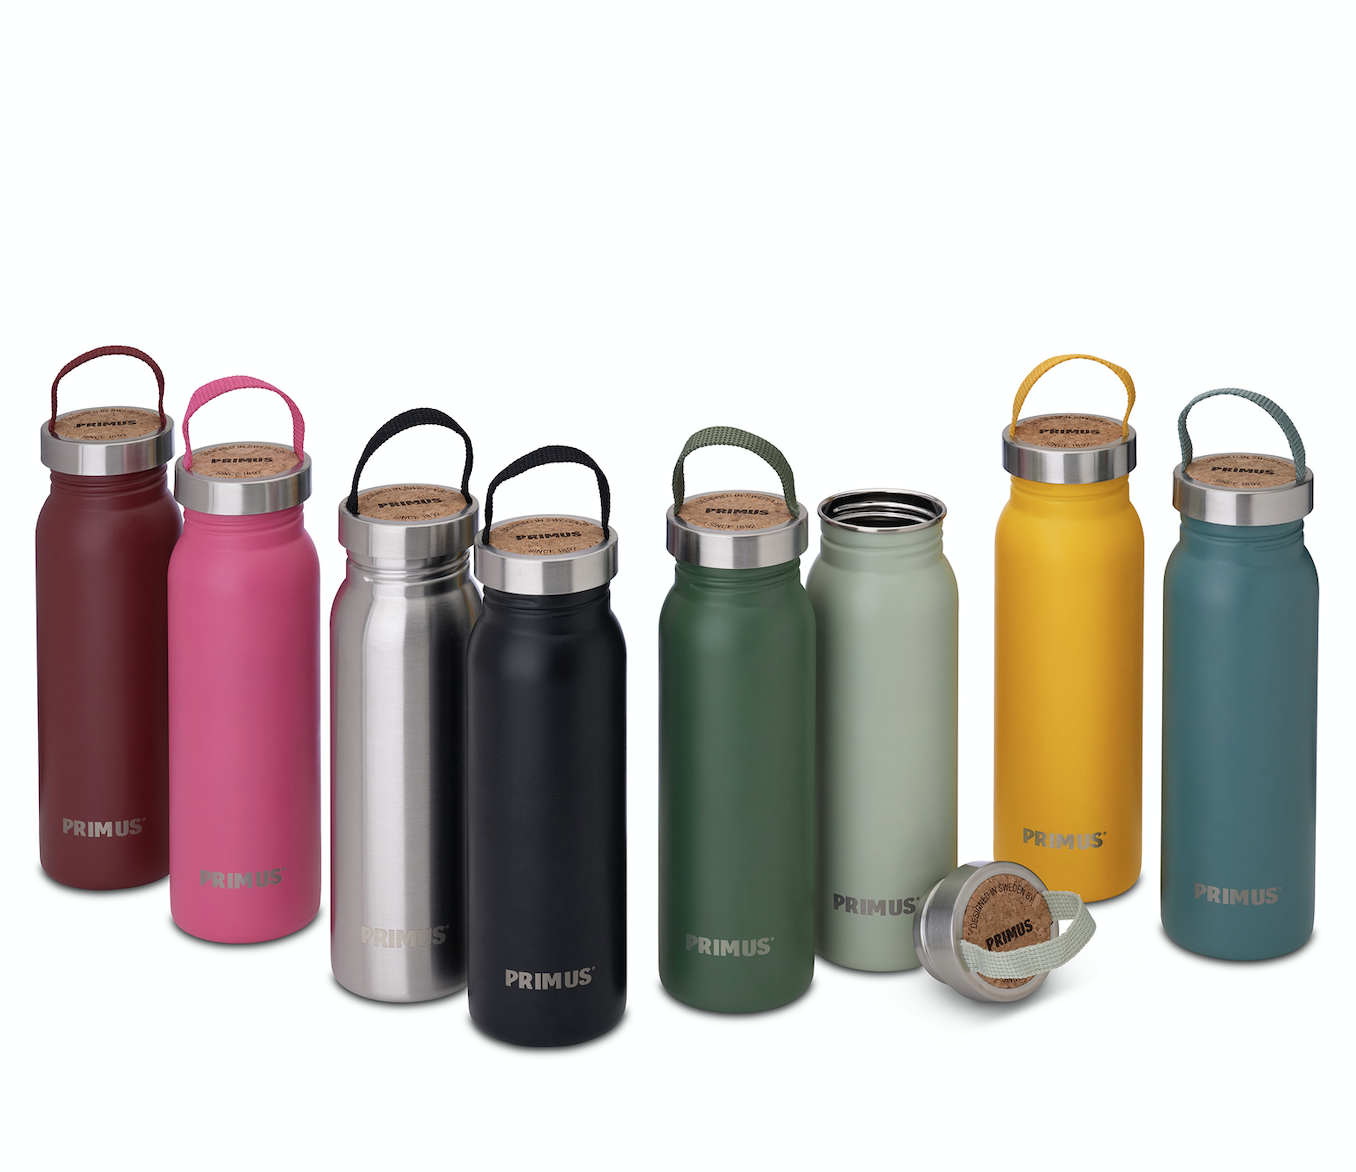 Primus Launches New Drinking Bottle Collection to Fit Fjällräven Kå